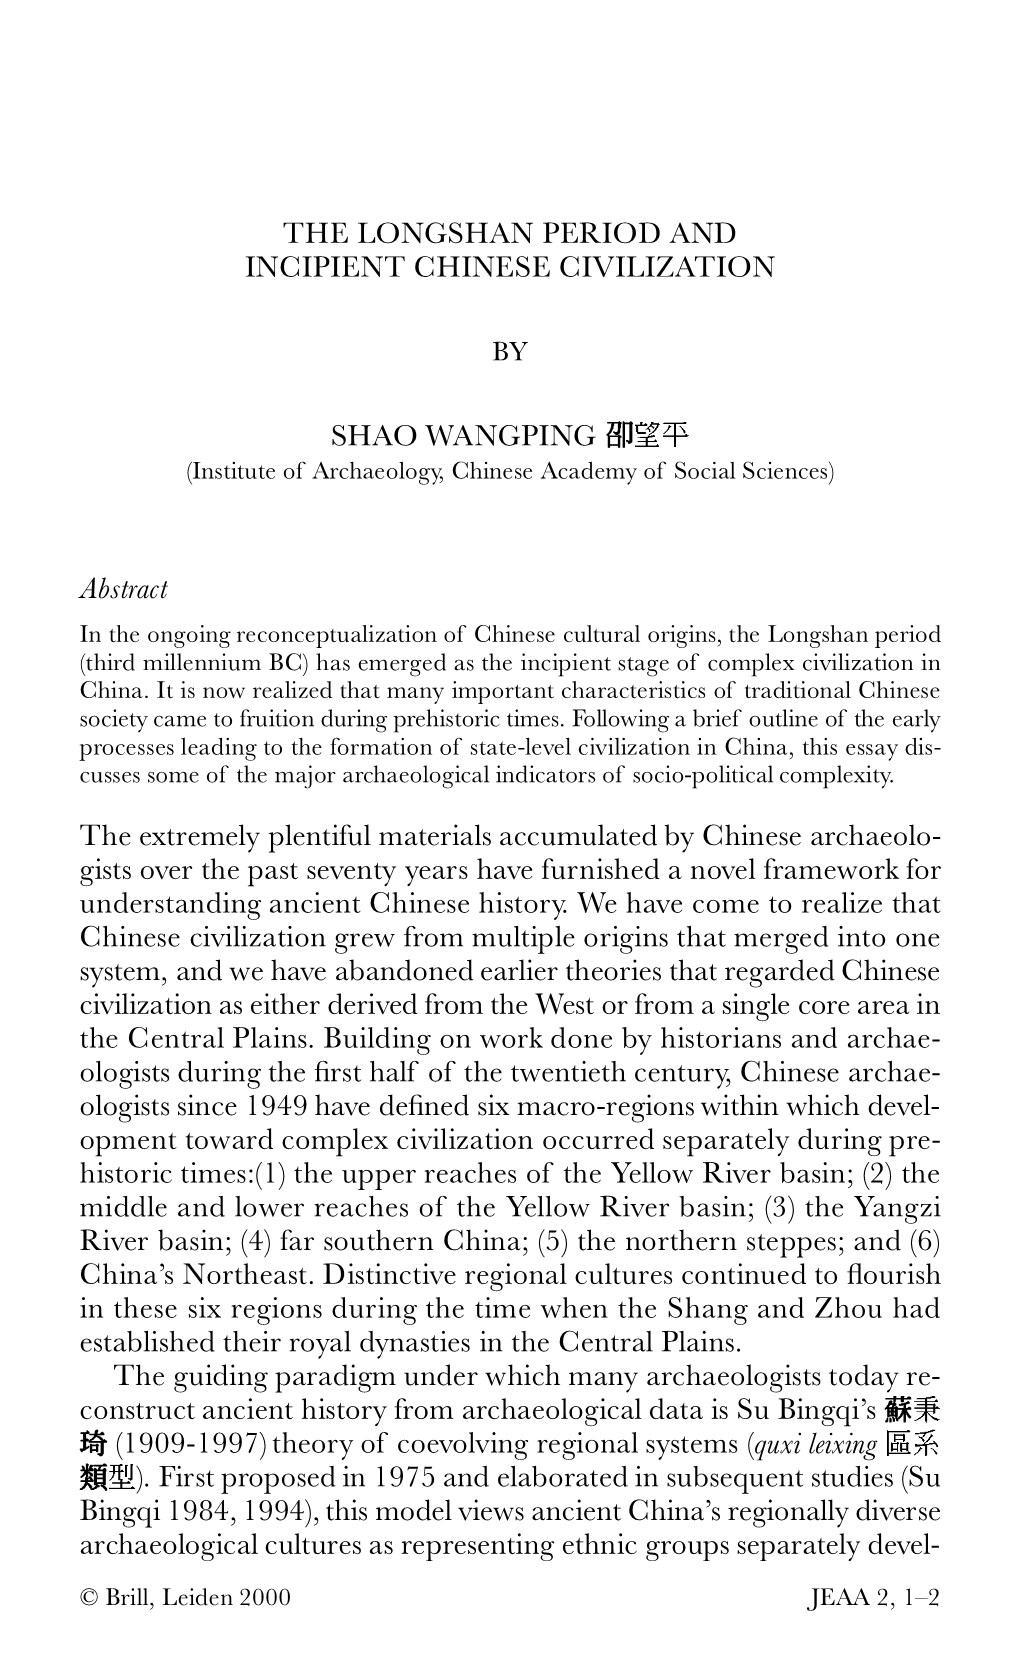 The Longshan Period and Incipient Chinese Civilization